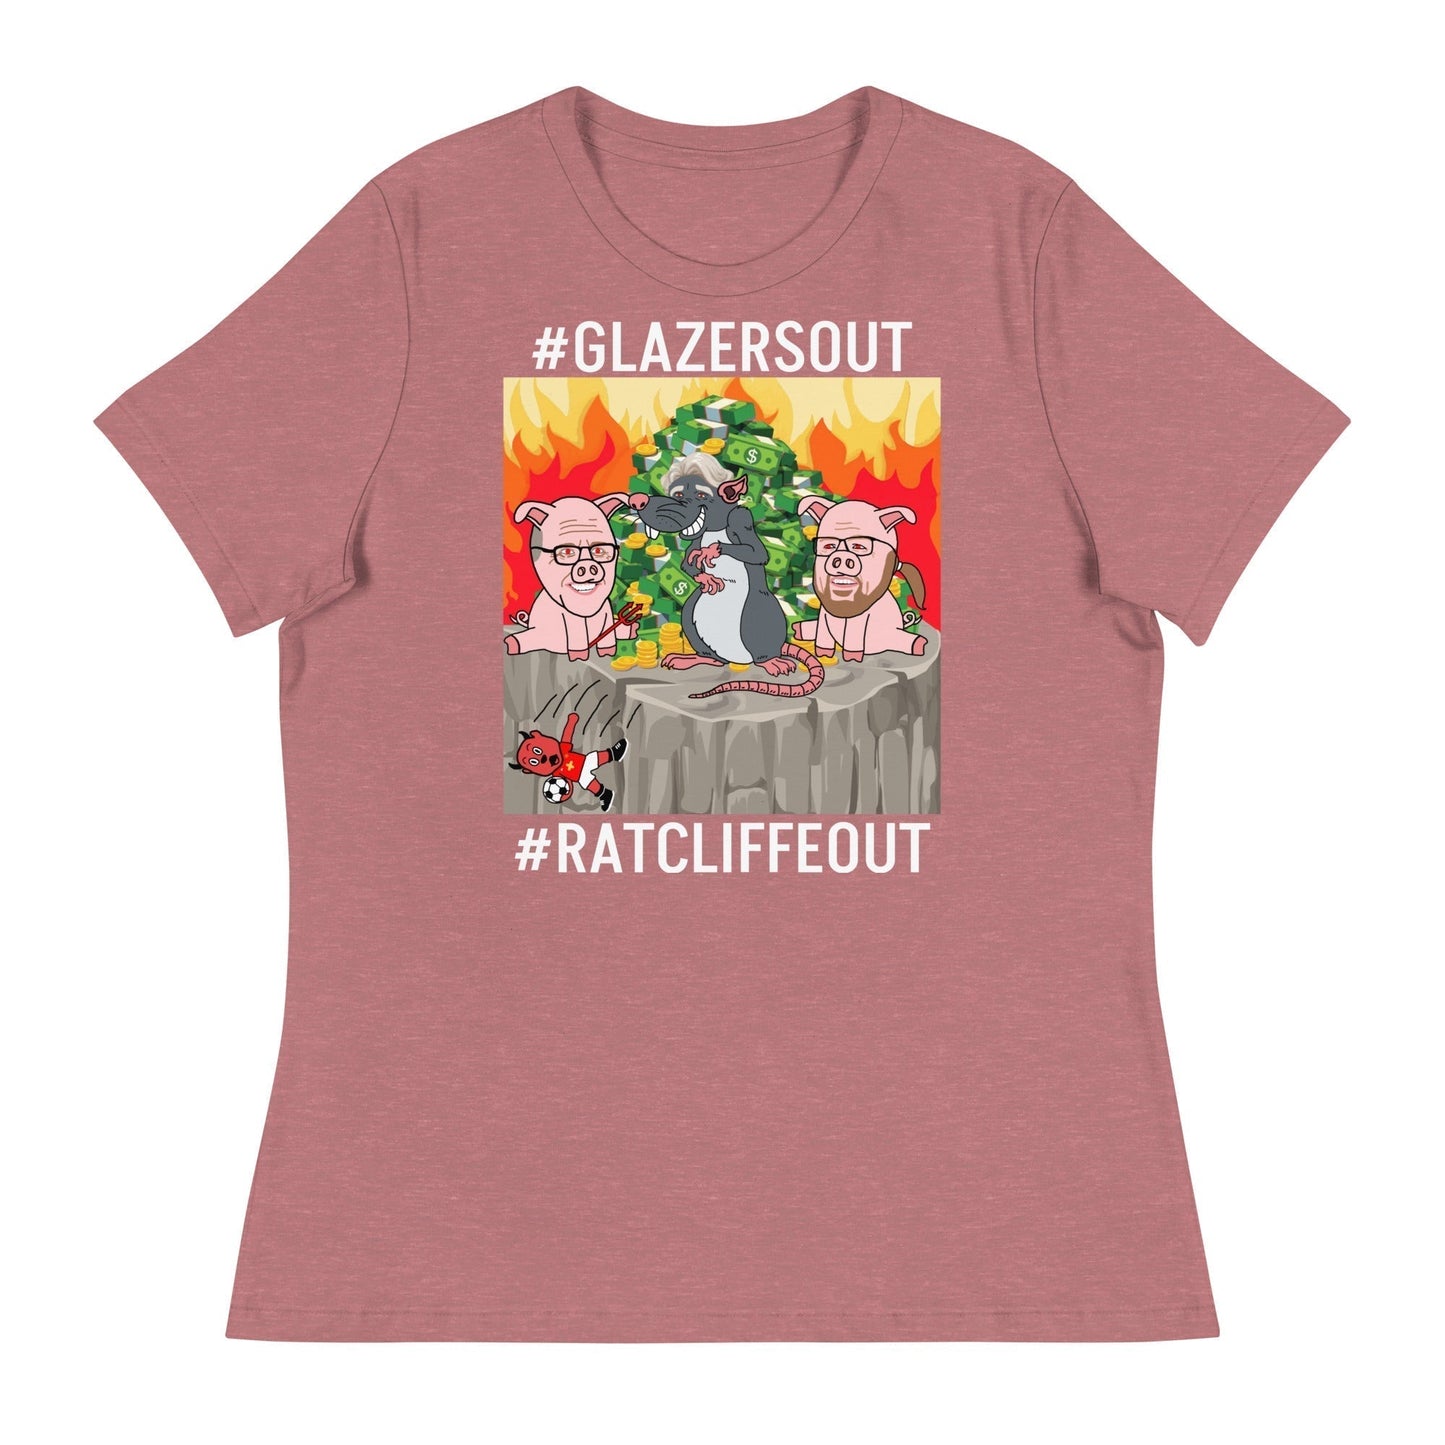 Manchester United Ratcliffe Out, Glazers Out Women's Relaxed Fit T-Shirt, White Letters, #GlazersOut #RatcliffeOut Next Cult Brand Football, GlazersOut, Manchester United, RatcliffeOut